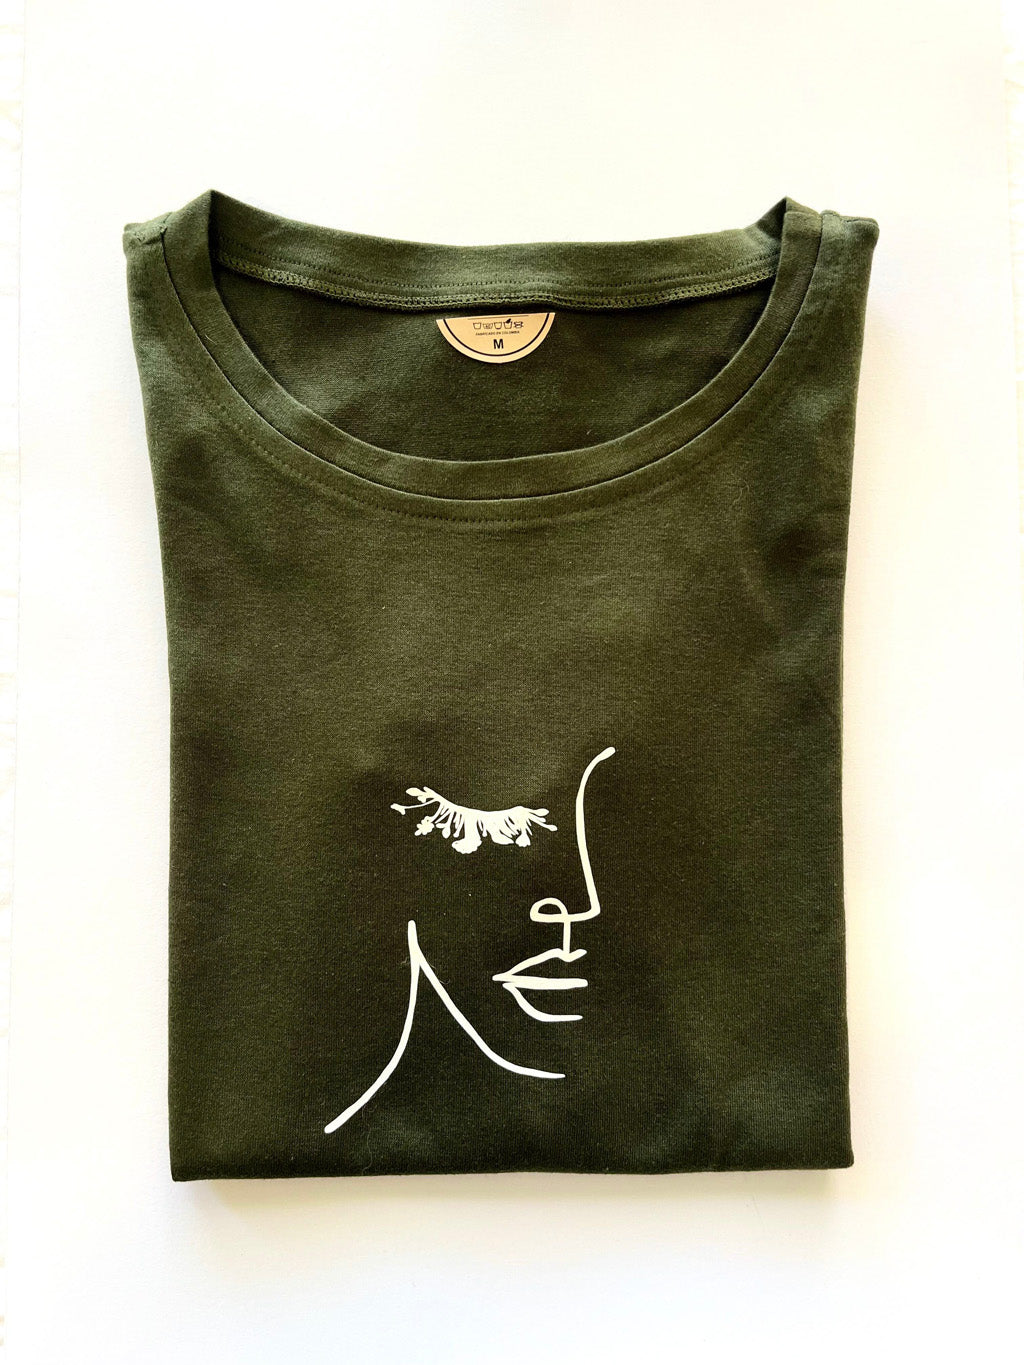 Woman t-shirt made of cotton